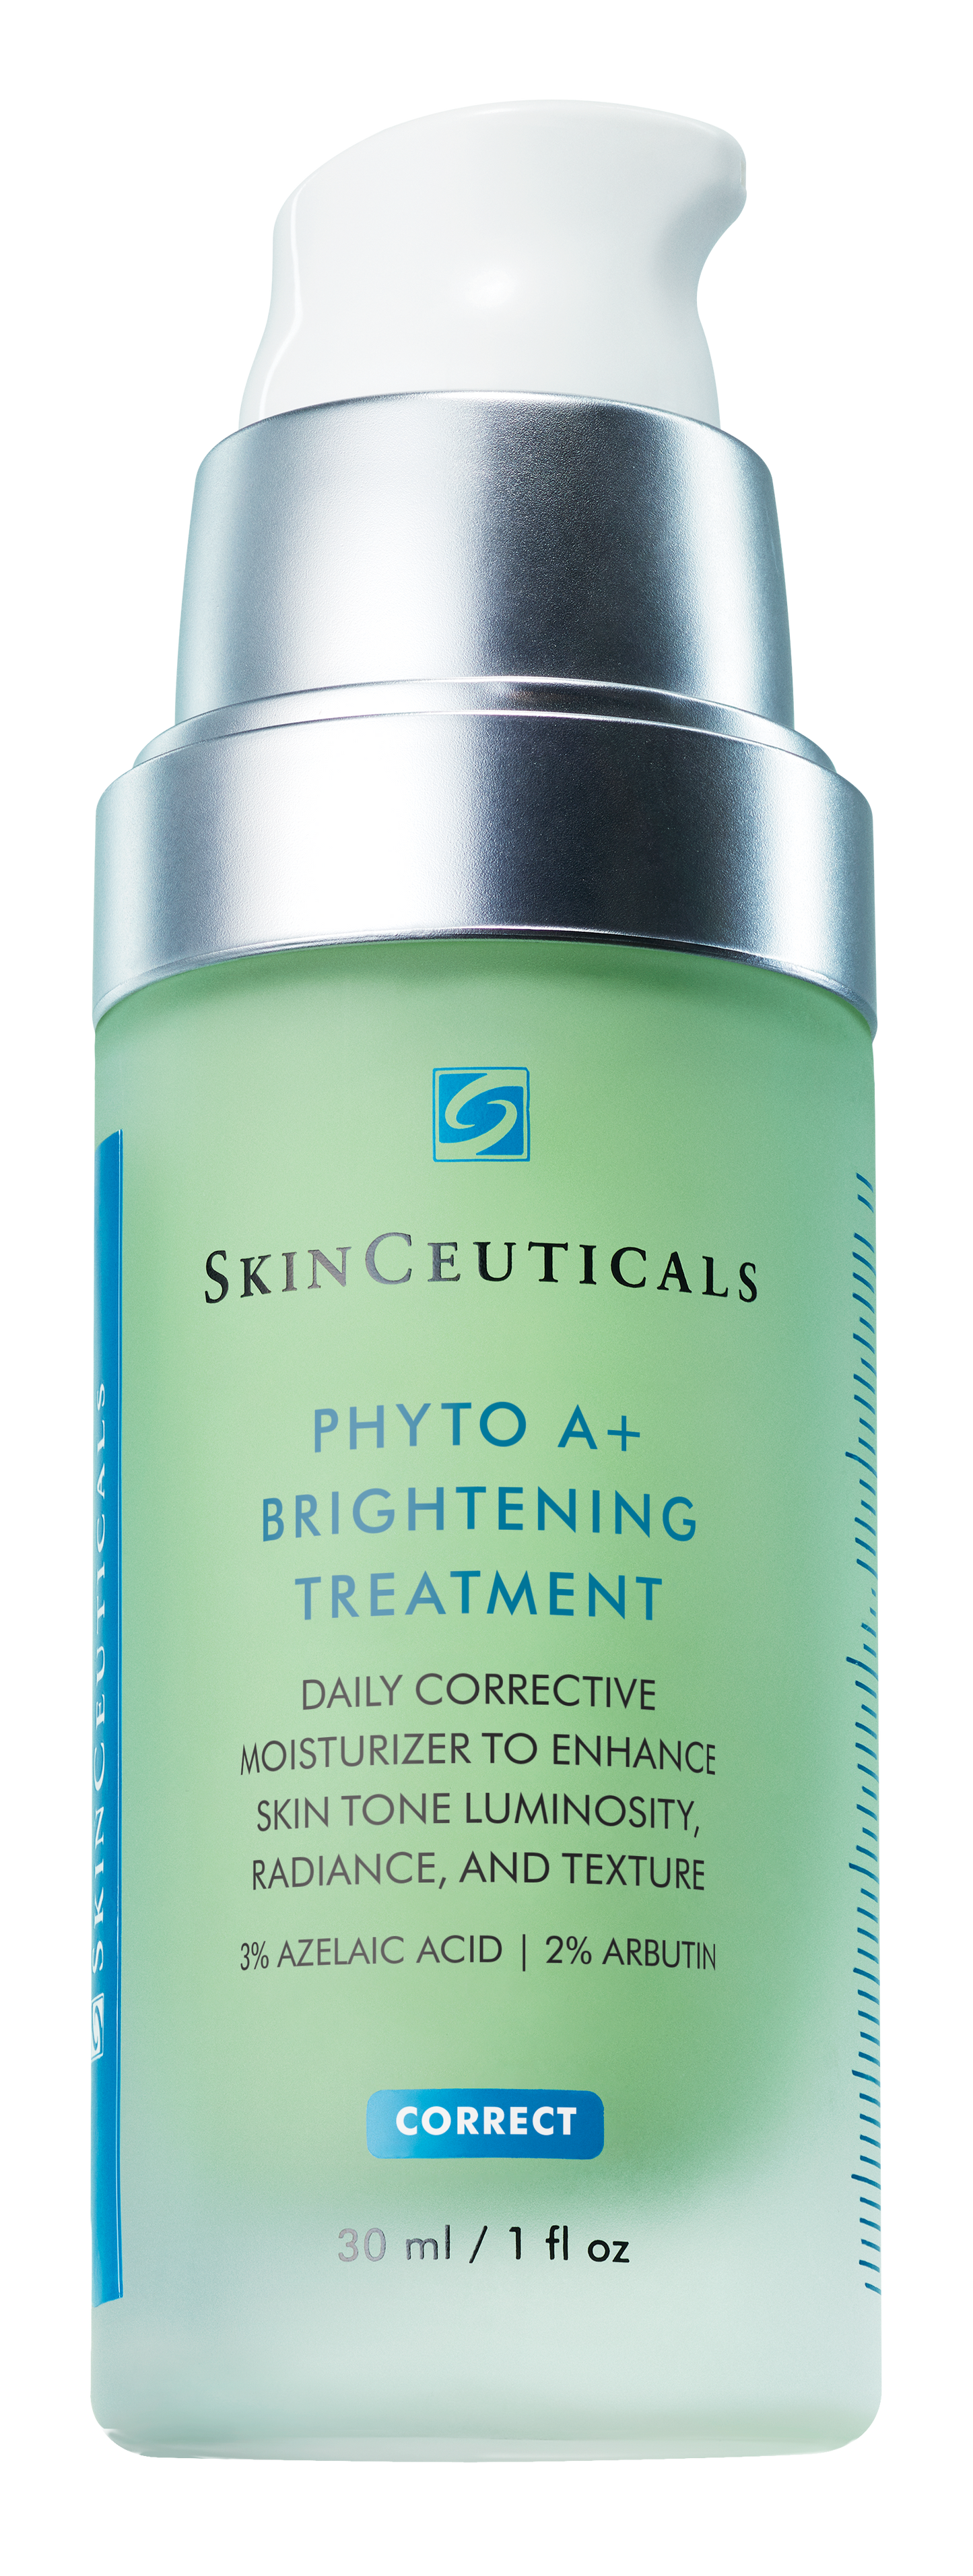 SkinCeuticals Phyto A+ Brightening Treatment - Accent on Beauty